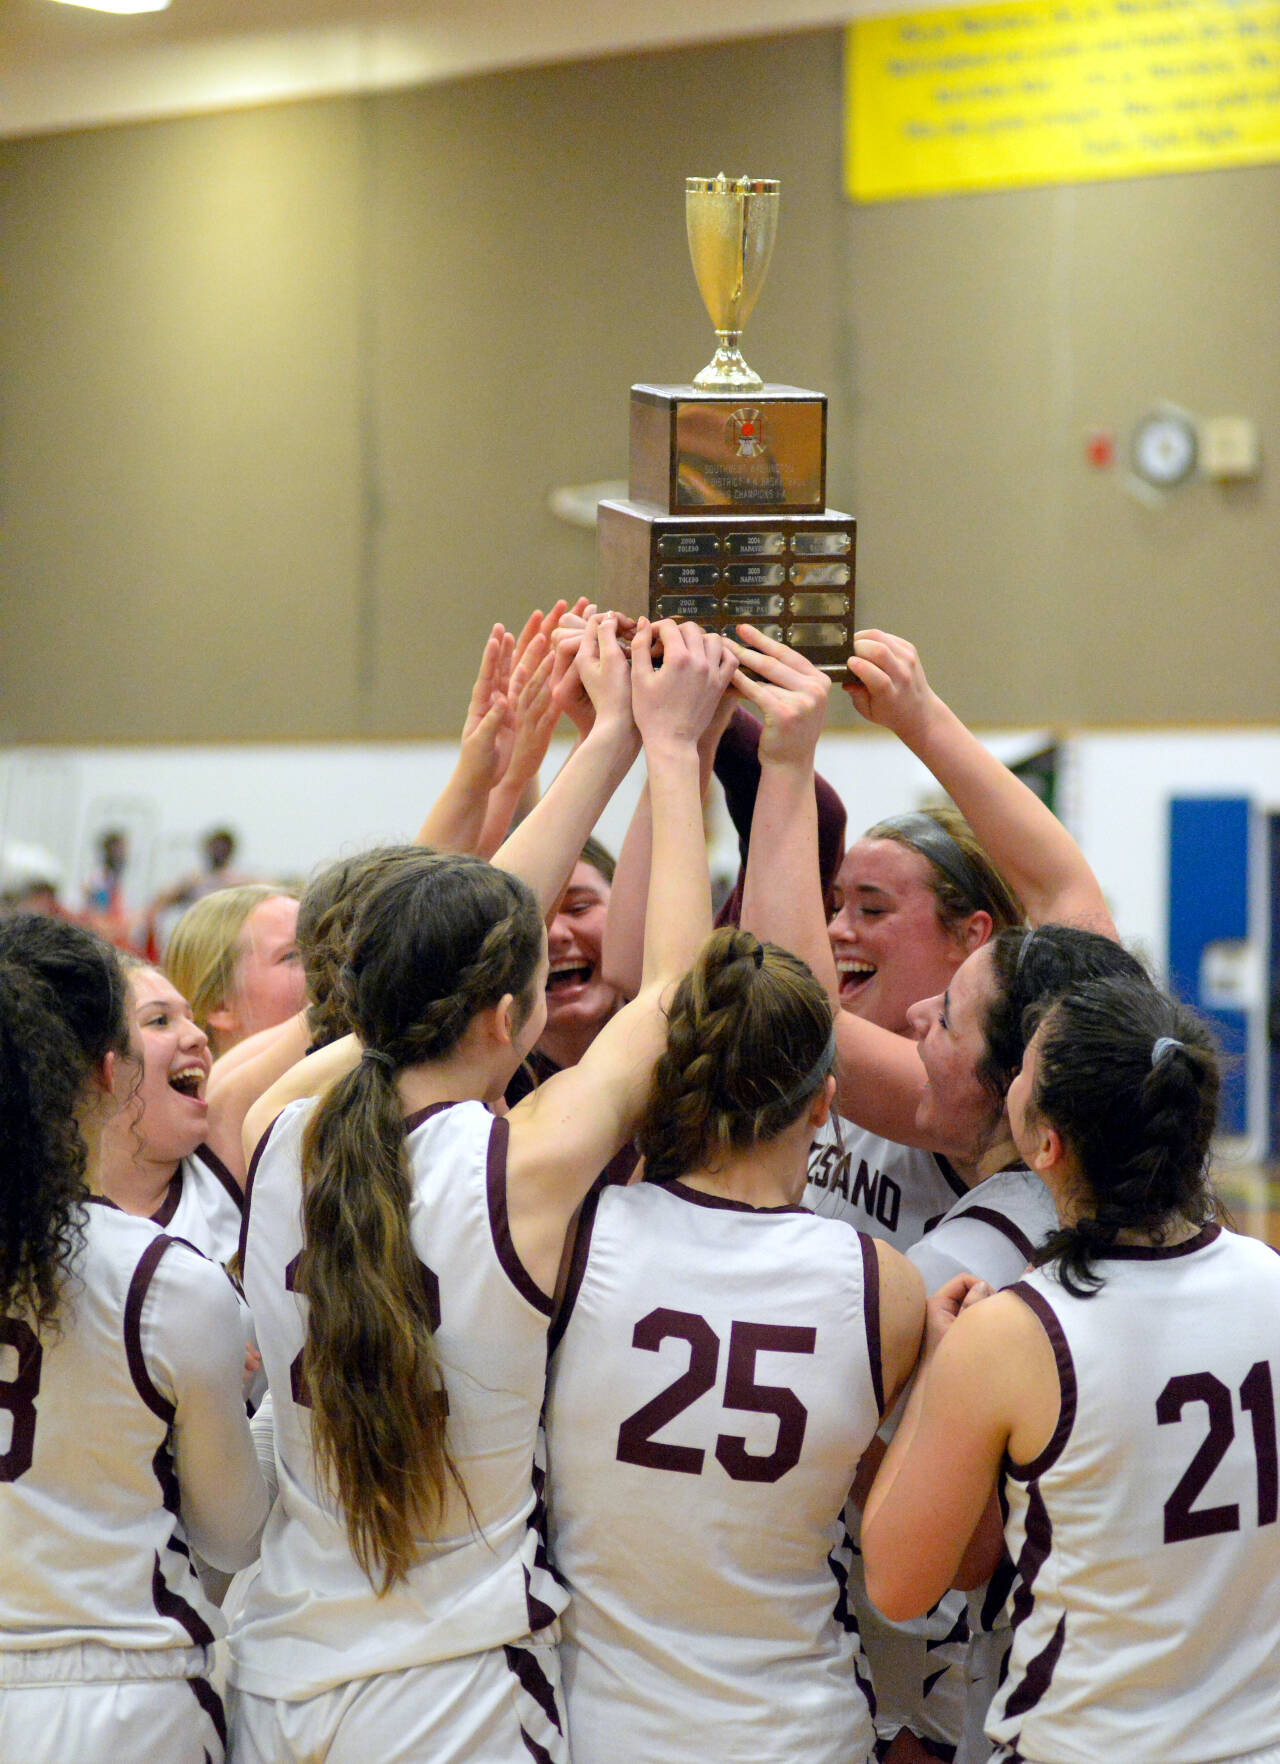 Montesano Rallies To Win Second Straight District Championship The Daily World 9670